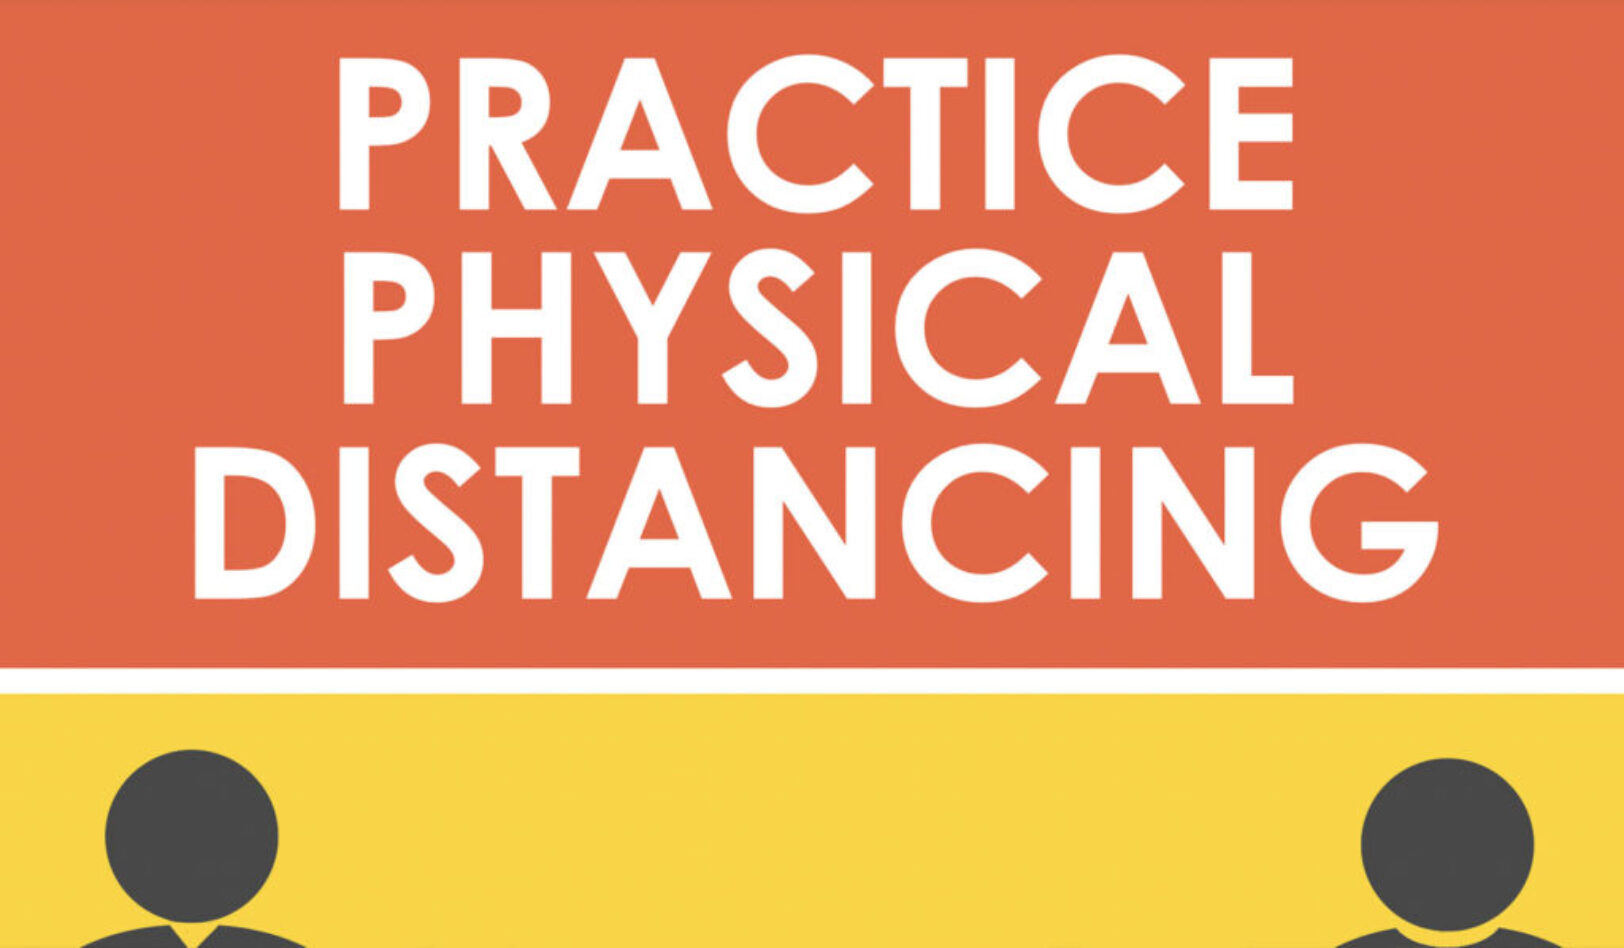 Practice Physical Distancing (Standing)